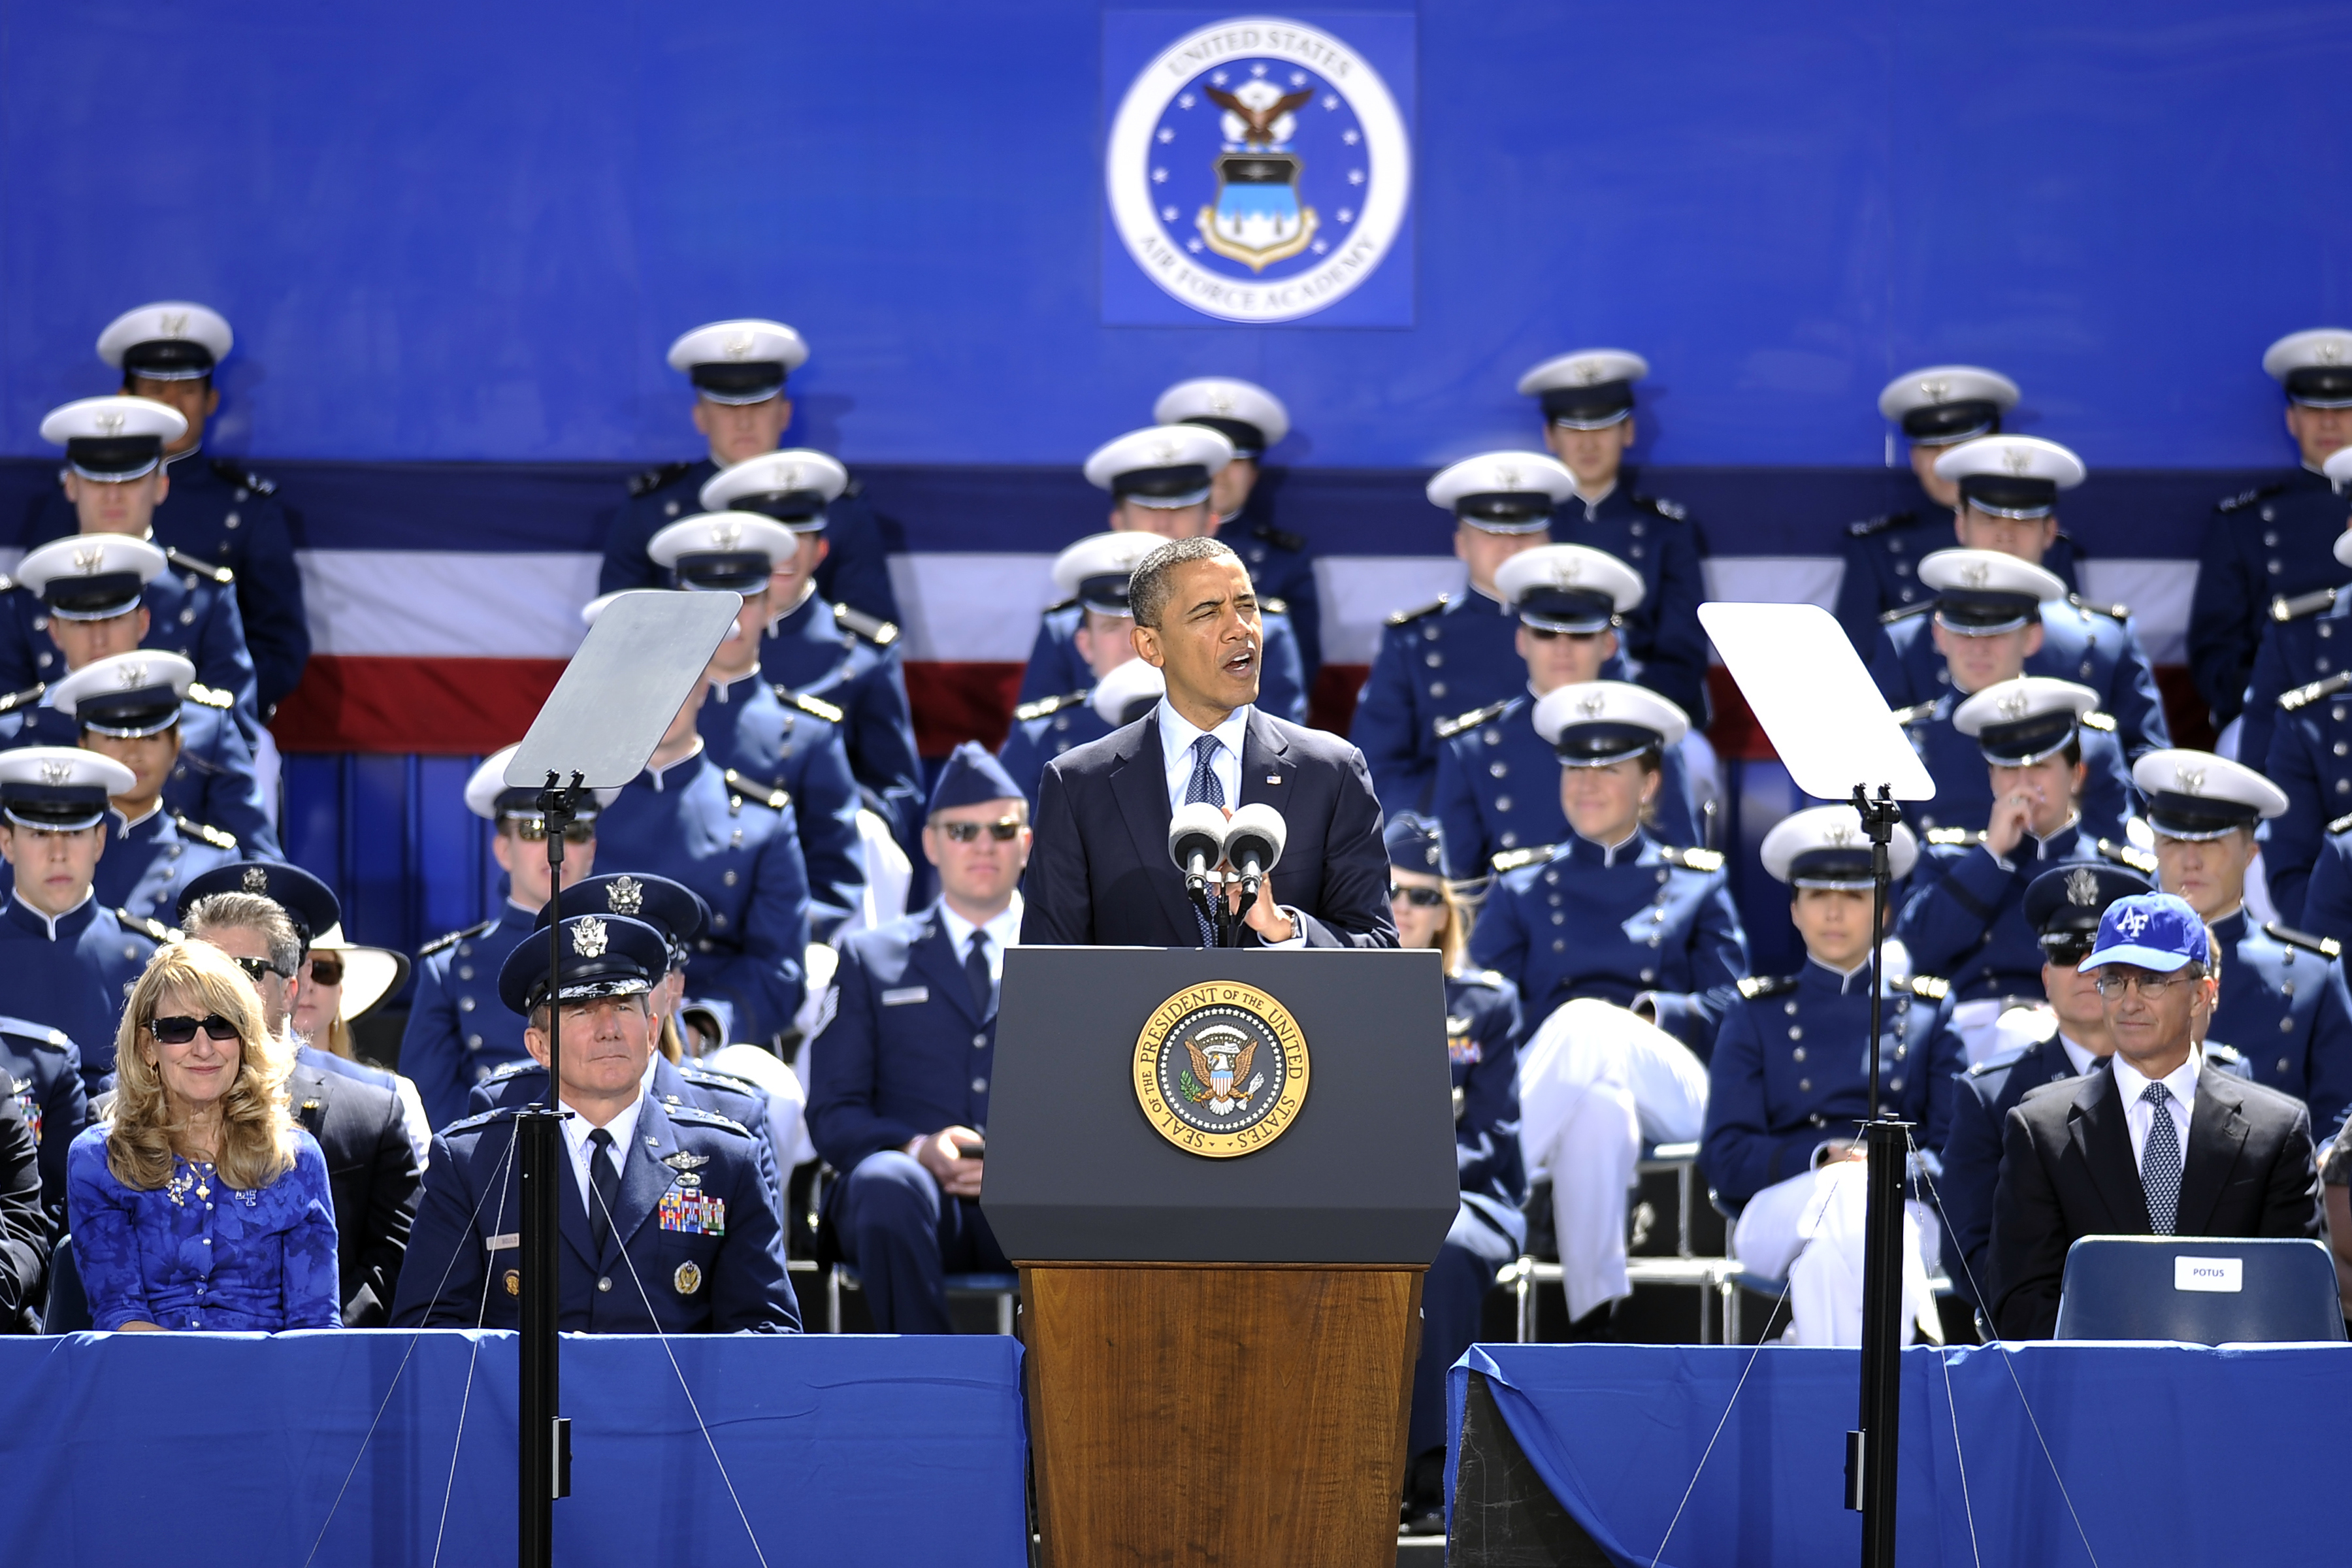 President Barack Obama speaks during the commencement ceremony at the United States Air Force Academy in Colorado Springs on May 23, 2012. (AAron Ontiveroz—Denver Post/Getty Images)